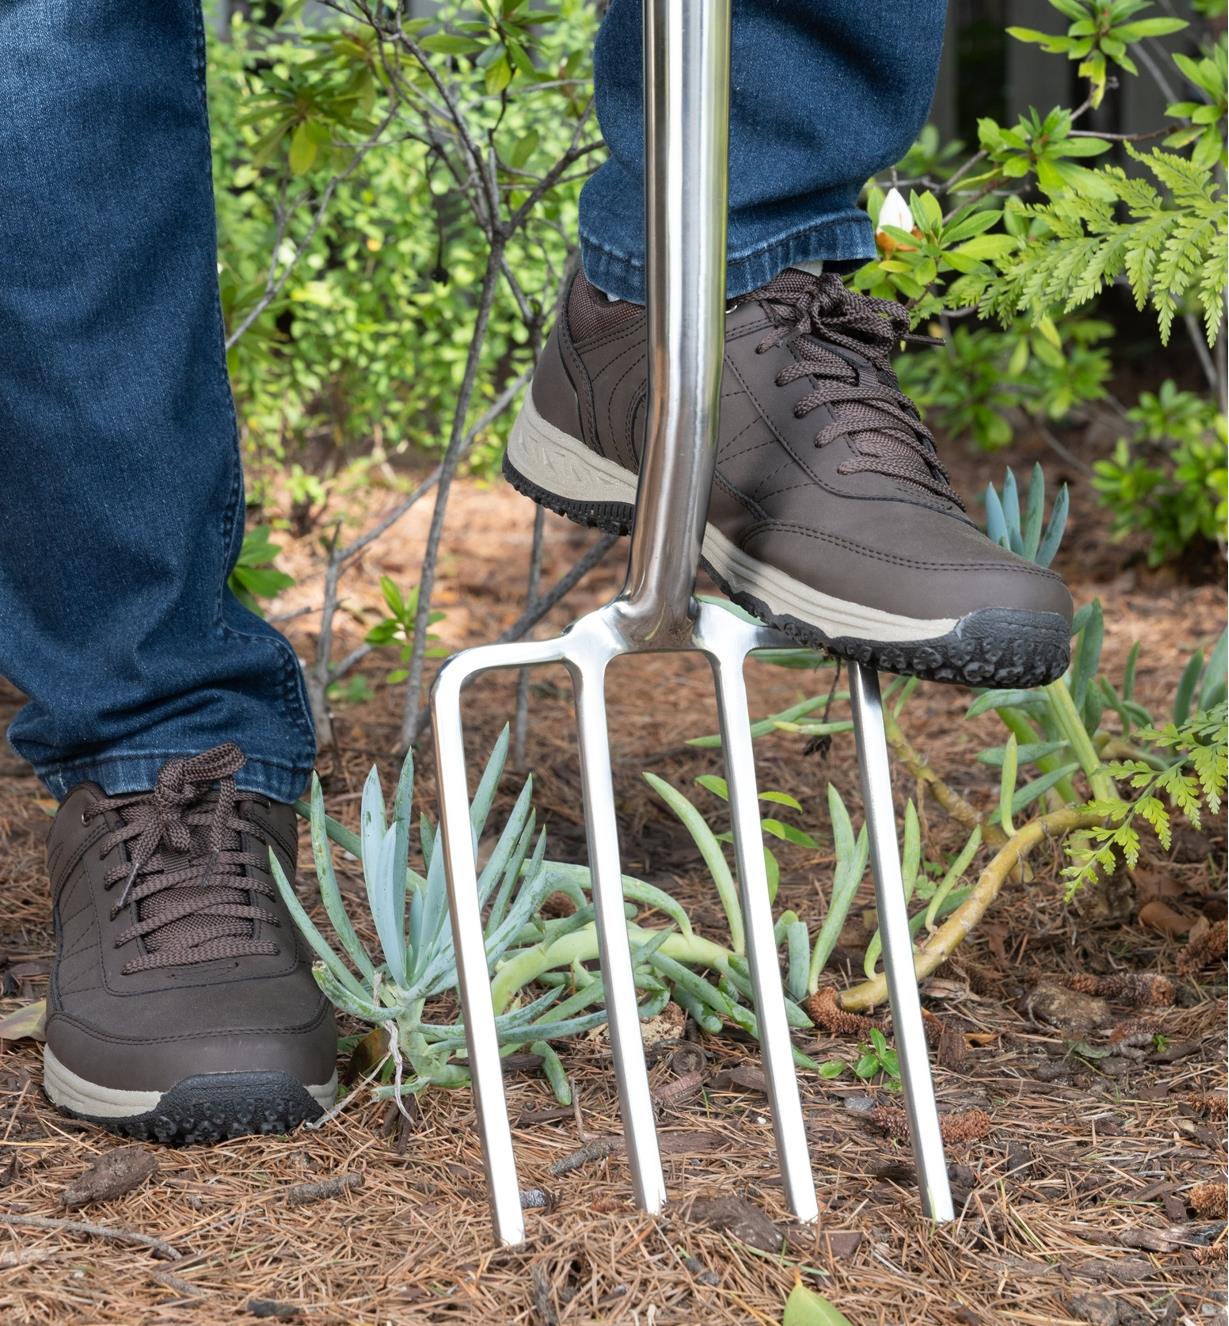 A gardener uses her foot to push the digging fork into the ground